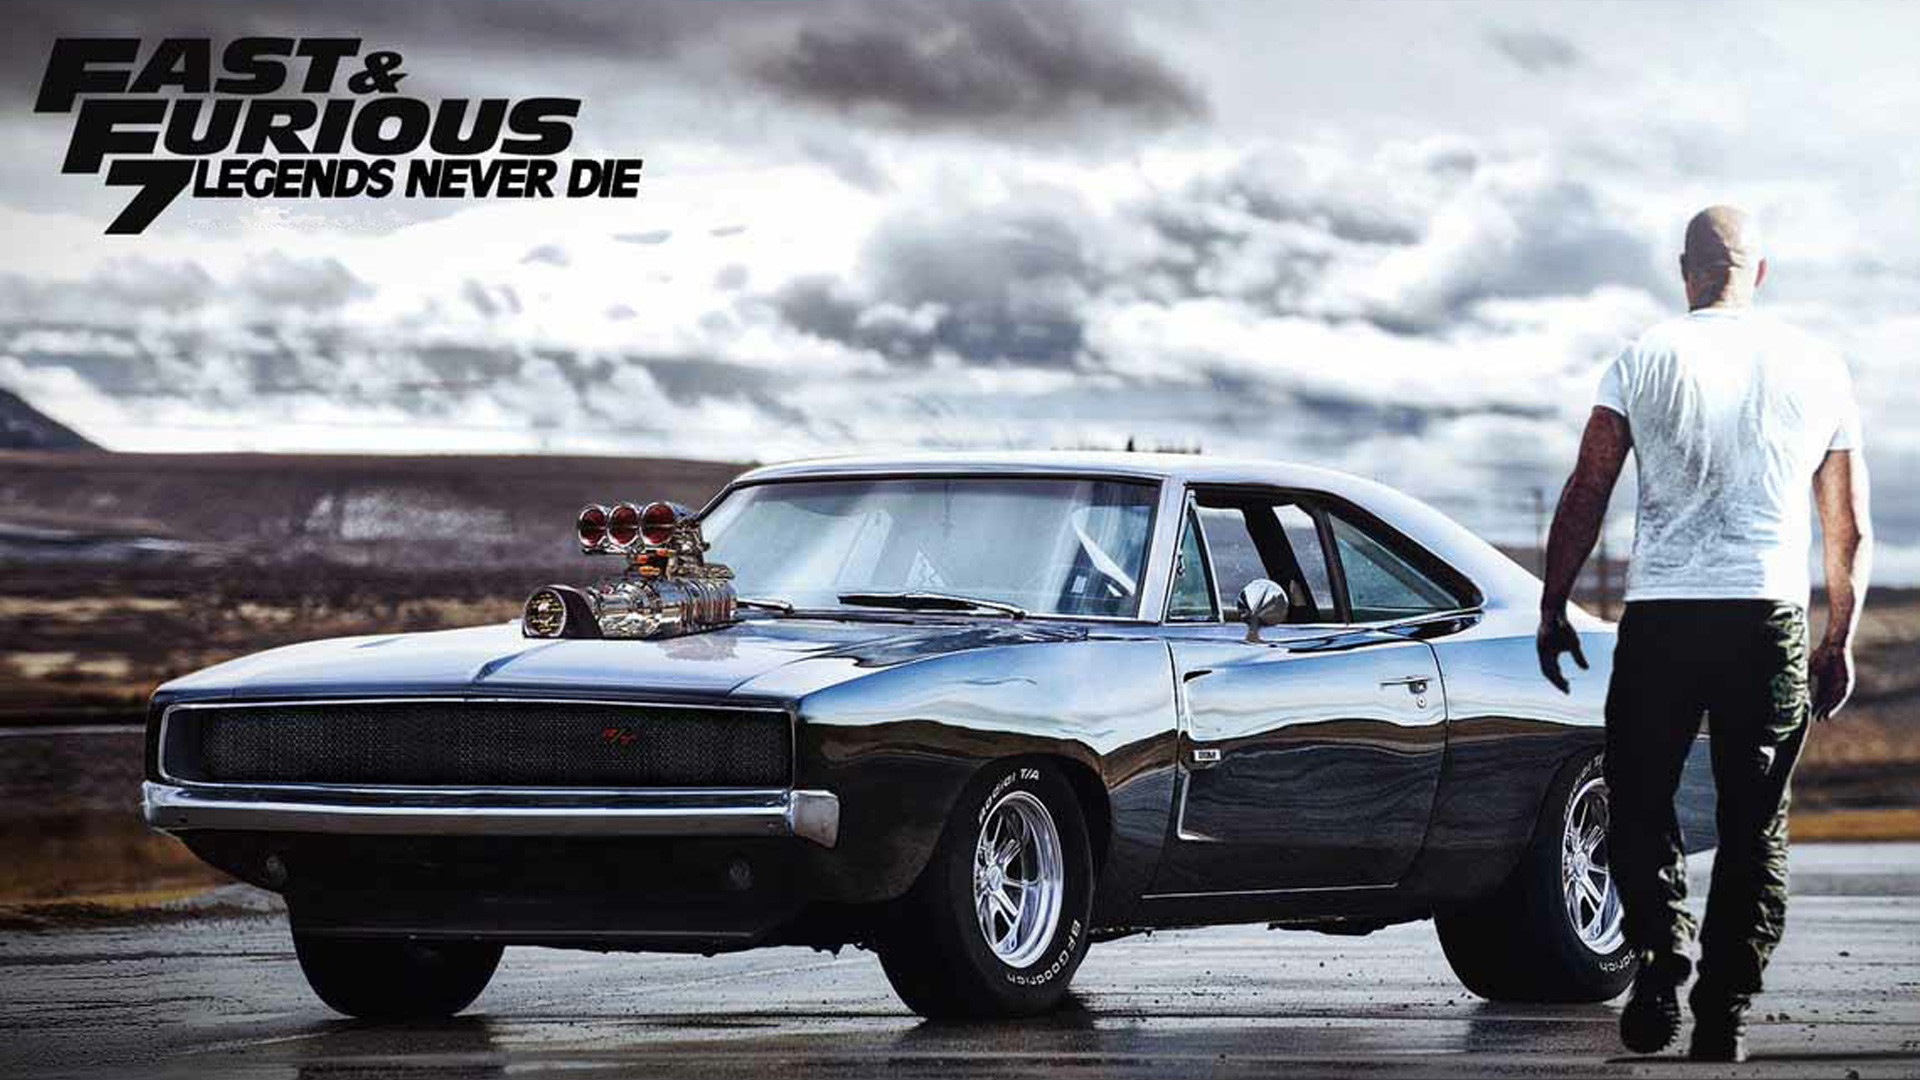 1920x1080 Fast Furious HD Wallpapers Backgrounds Wallpaper